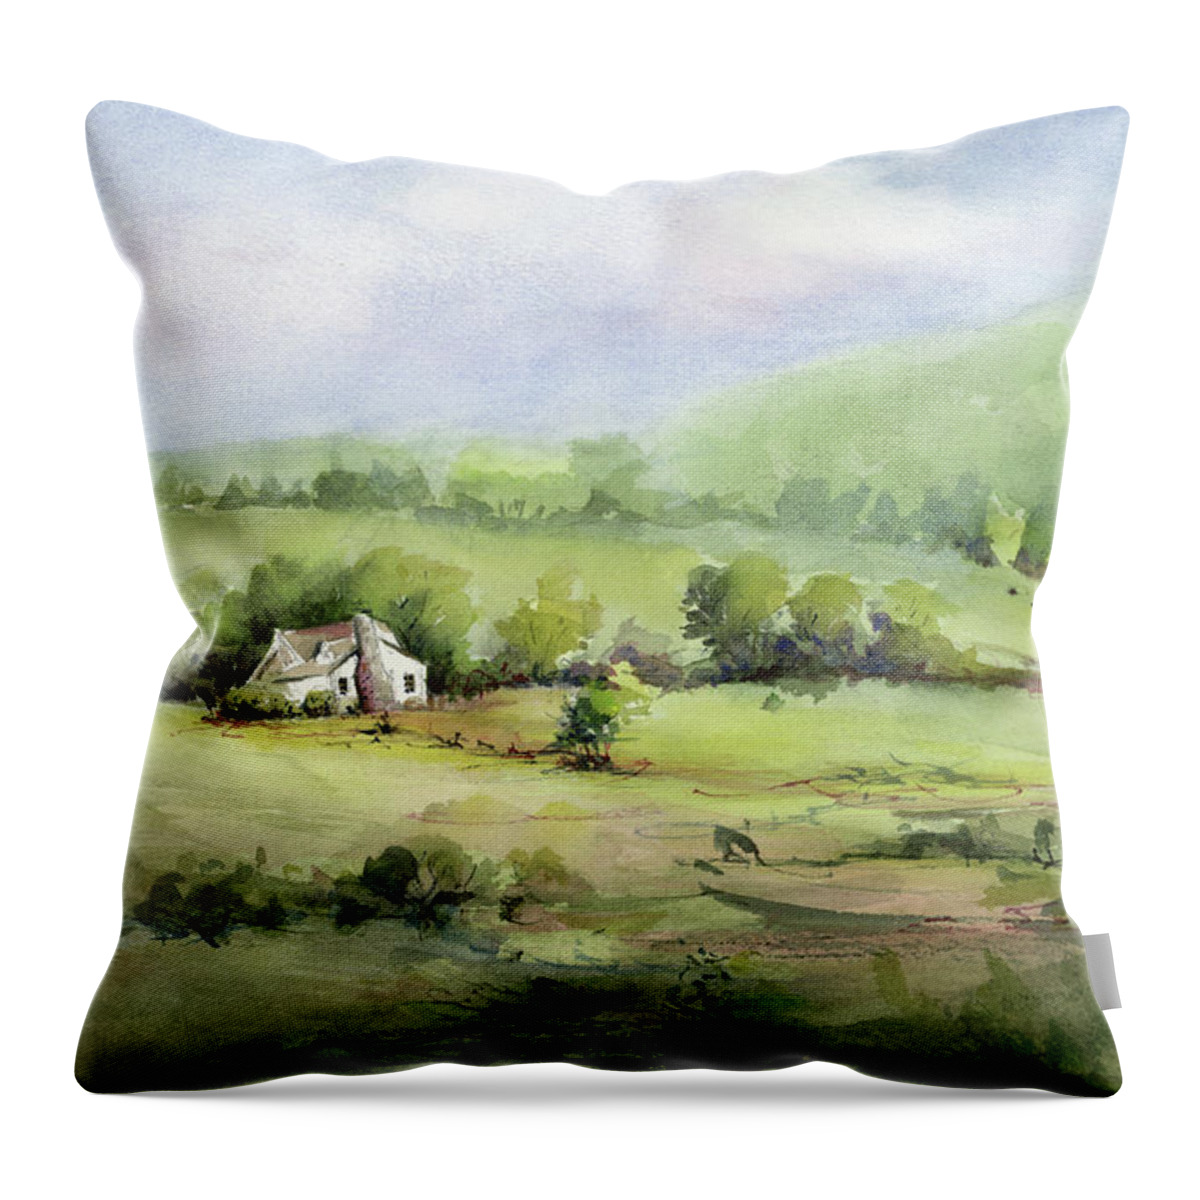 Face Mask Throw Pillow featuring the painting Mountain Haze by Lois Blasberg